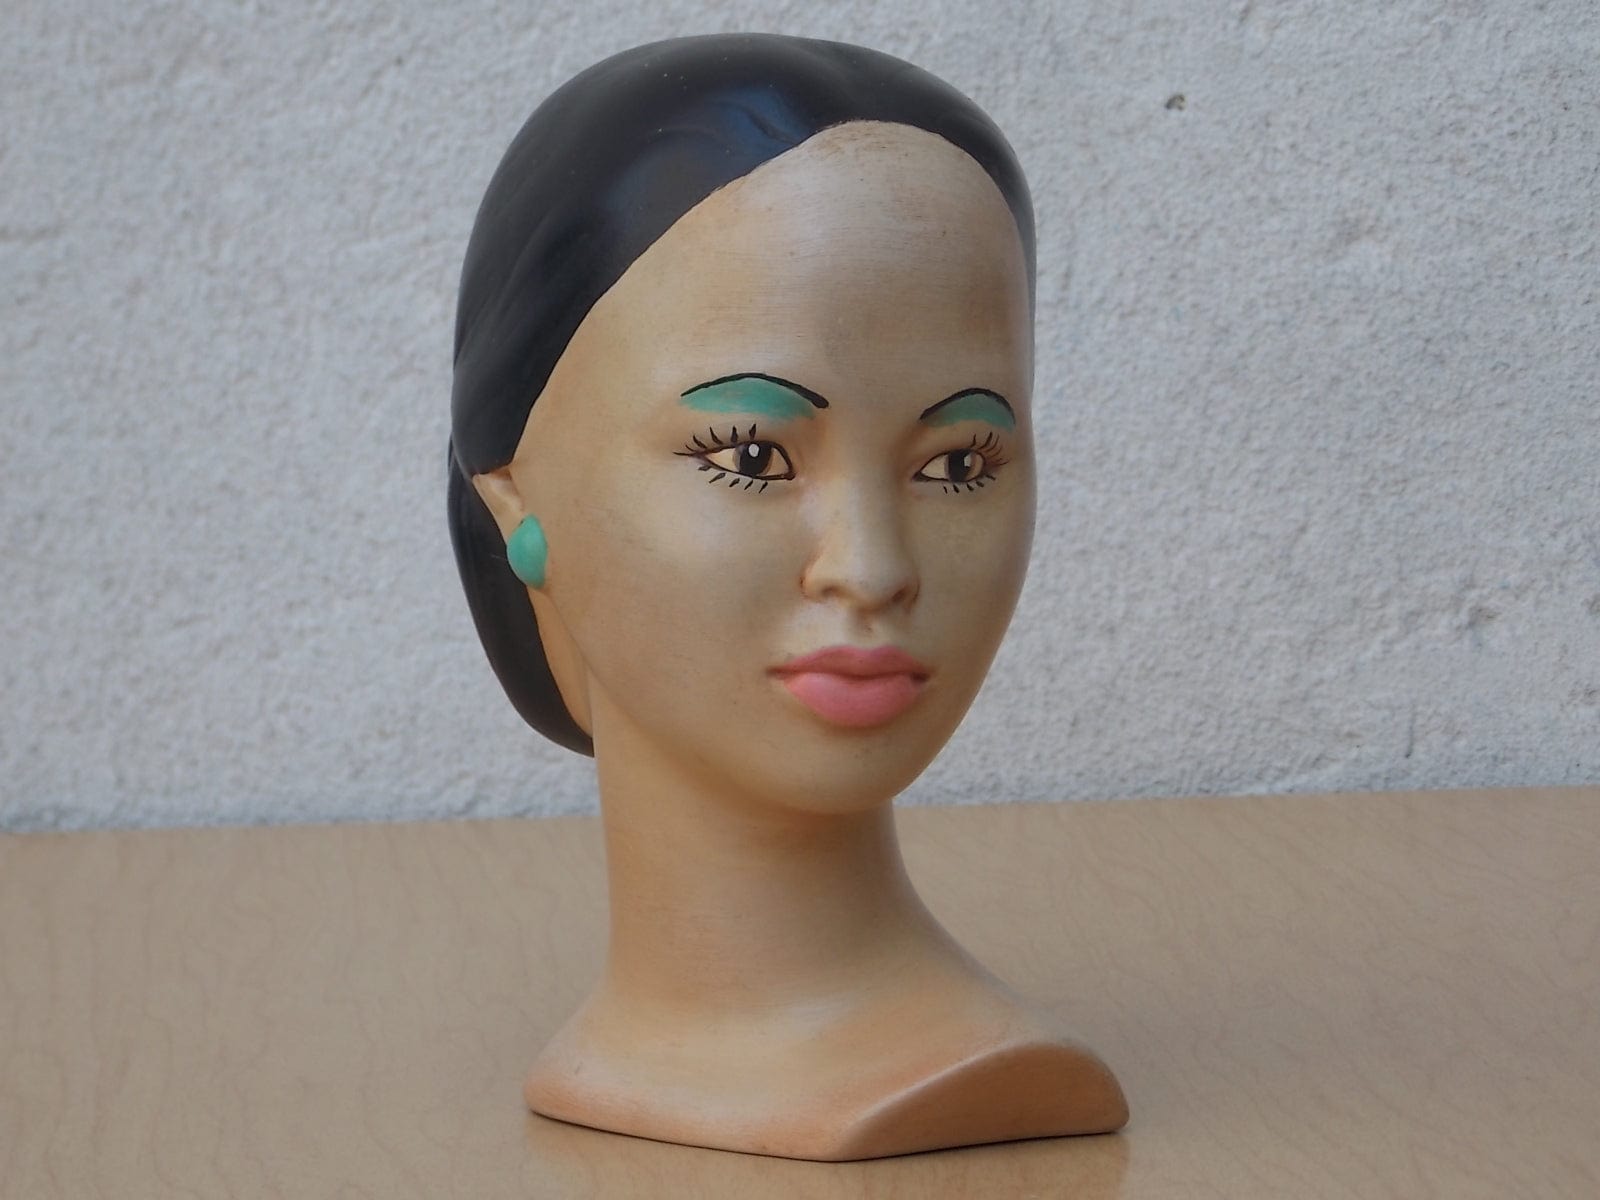 I Like Mike's Mid Century Modern Wall Decor & Art Ceramic Chalk Ware Bust of Asian Woman, Holland Mold, Hand painted, 1971